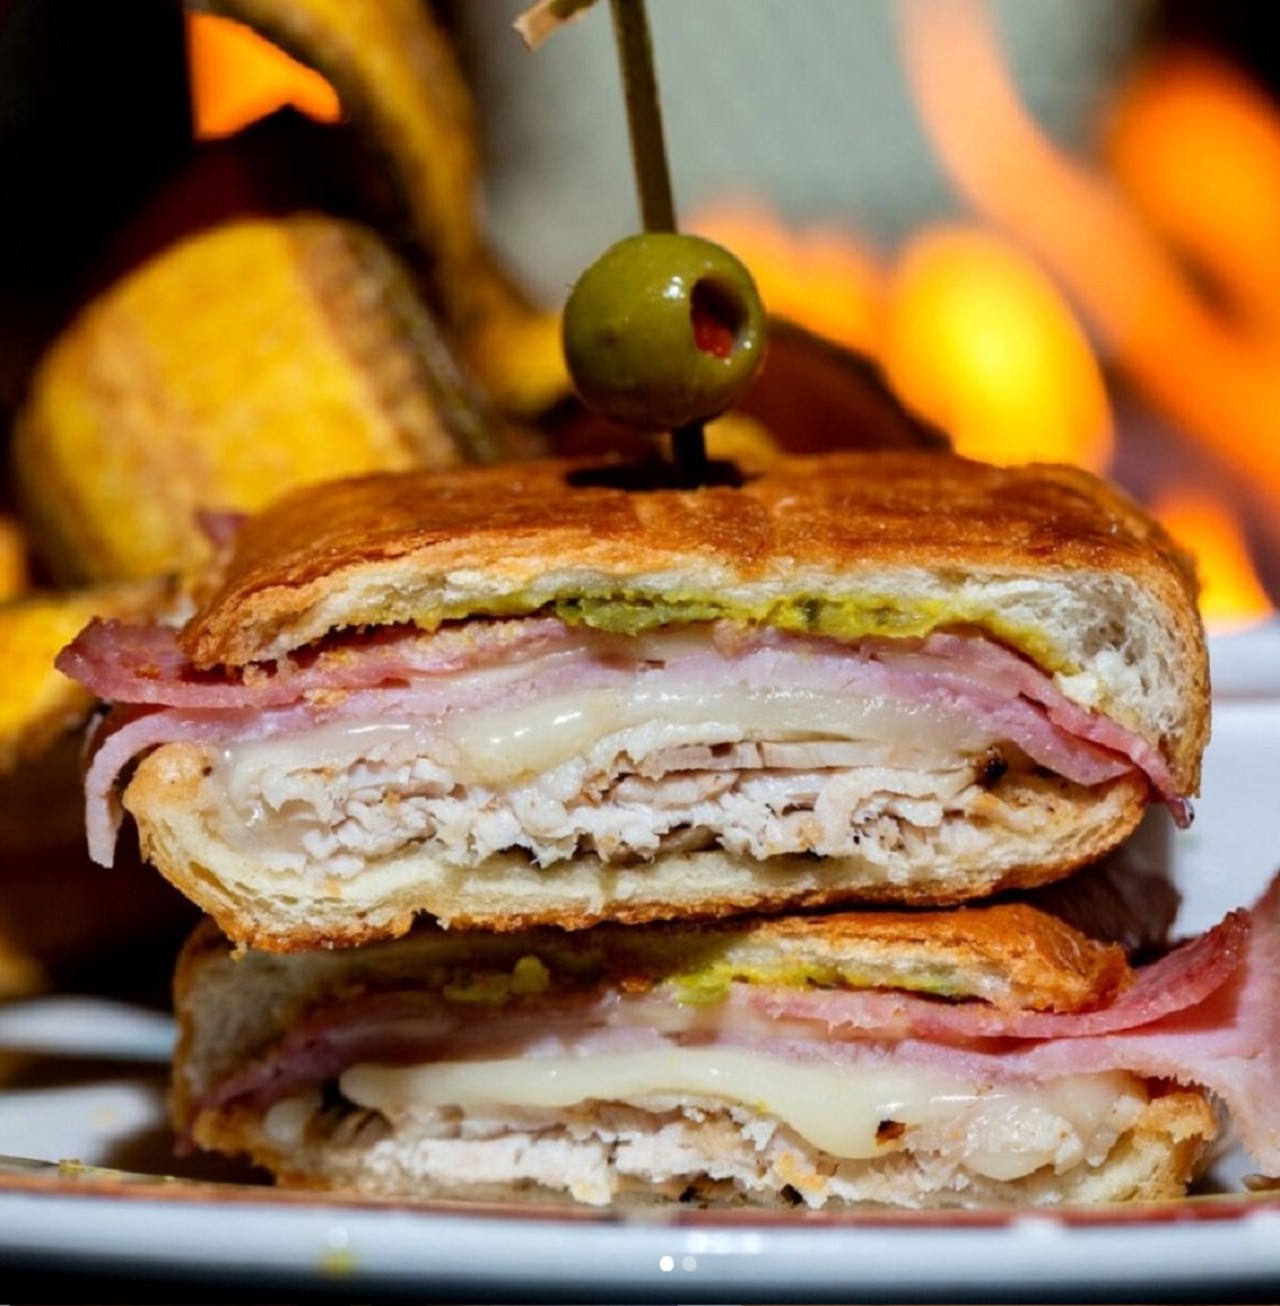 Cuba Libre 
9101 International Drive, Pointe Orlando
Cuba Libre doesn&#146;t just have good food, they serve up the whole experience. Try their twist on a Cuban sandwich. 
Photo via Cuba Libre Restaurant/Instagram9101 International Drive, Pointe Orlando
Cuba libre doesn&#146;t just have good food, they serve up the whole experience. Try their twist on a cuban sandwich. 
Photo via Cuba Libre Restaurant/Instagram